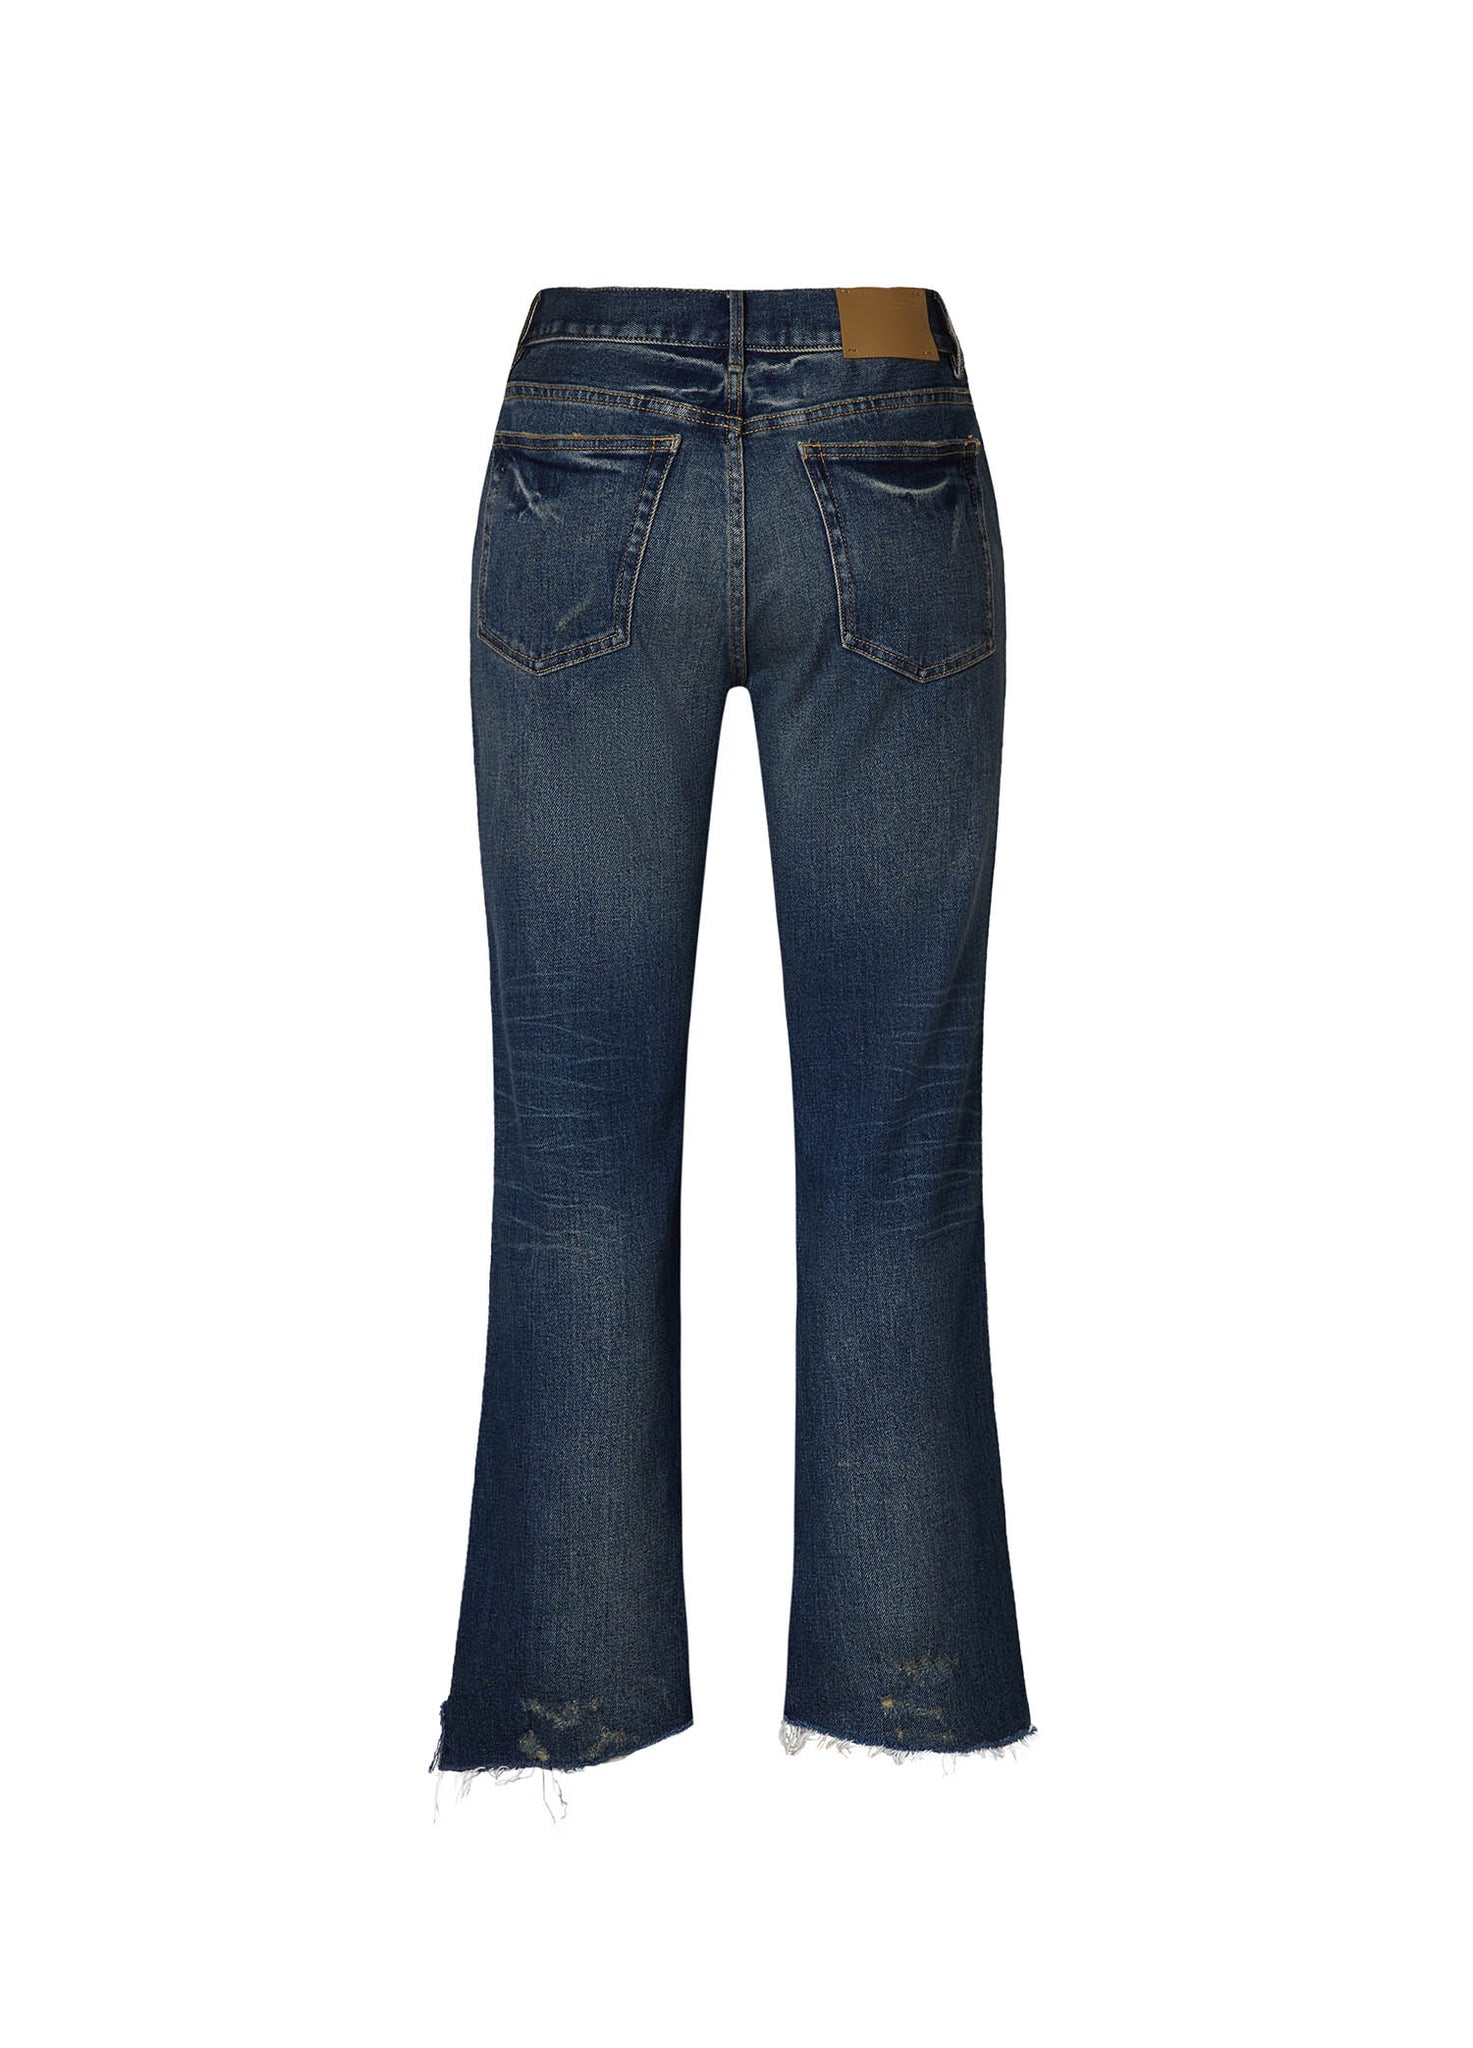 Jeans / JNBY Washed Slim Fit Flare Jeans